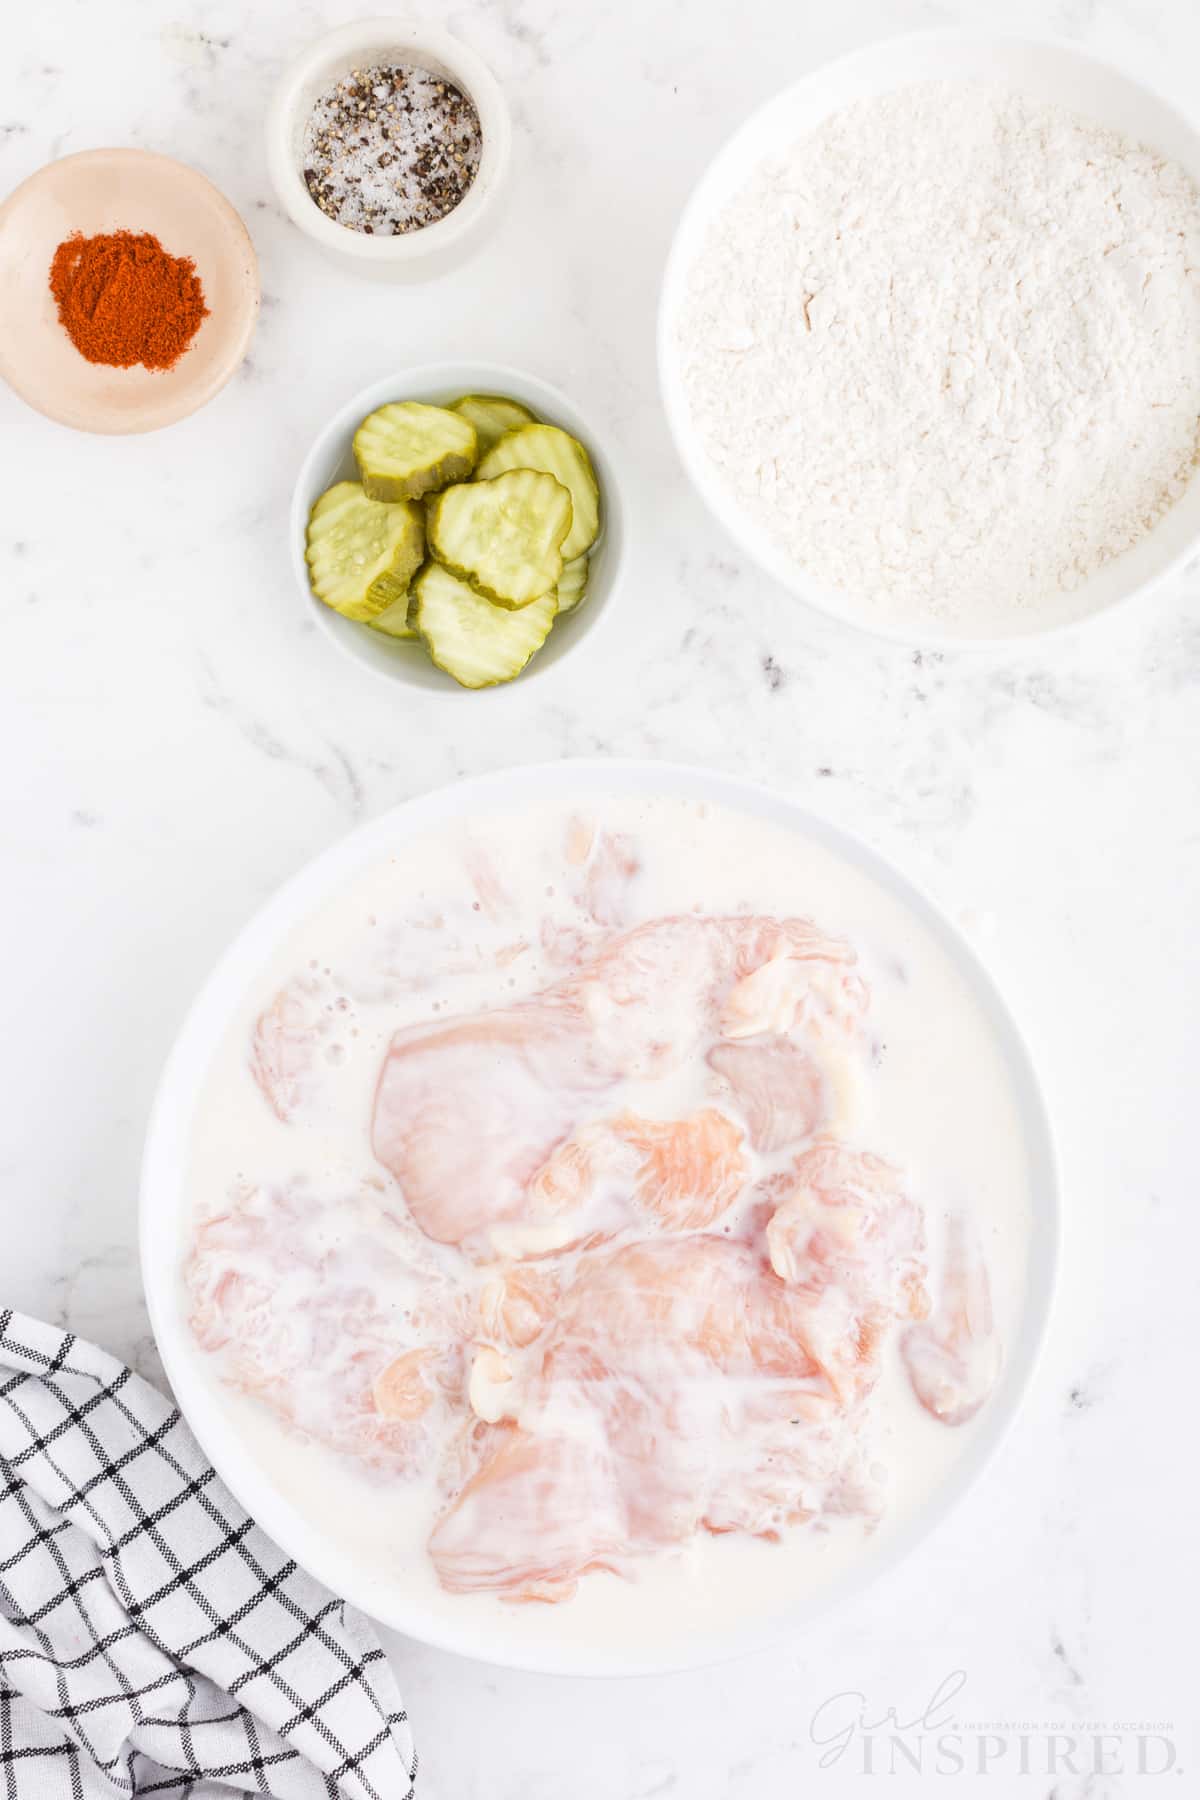 Bowl with buttermilk and raw chicken pieces, bowl of hot sauce, sliced dill pickles, flour, and seasoning, blue and white checked linen, on top of a white marble surface.